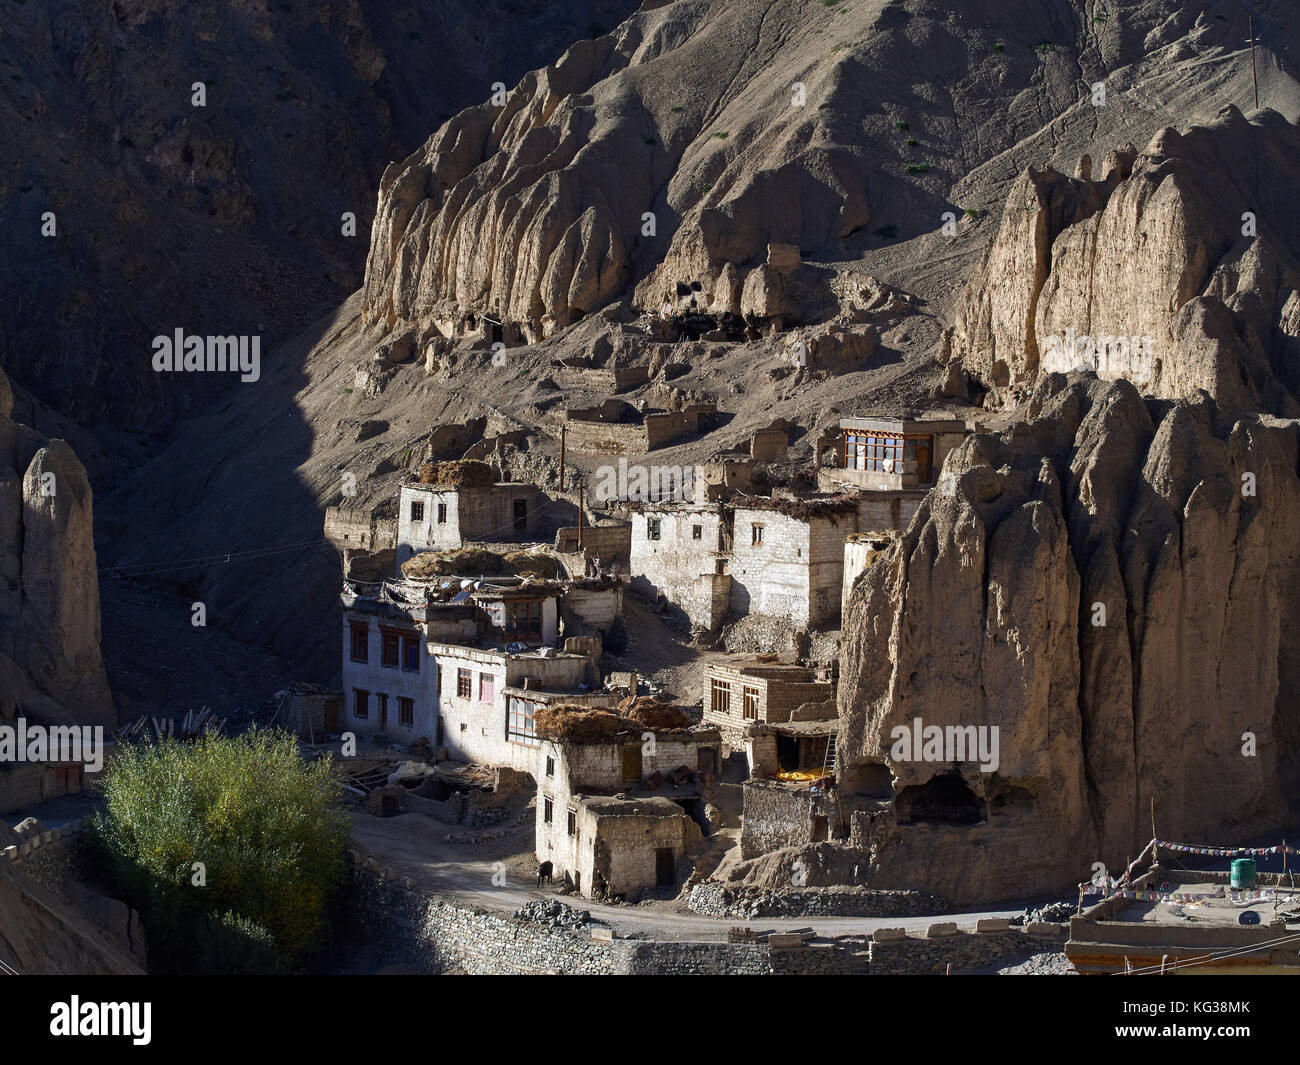 Mountain village of Lamayuru, white houses stand among high vertical rocks, are lit by the rays of the setting sun, Ladakh, the Himalayas, Northern In Stock Photo